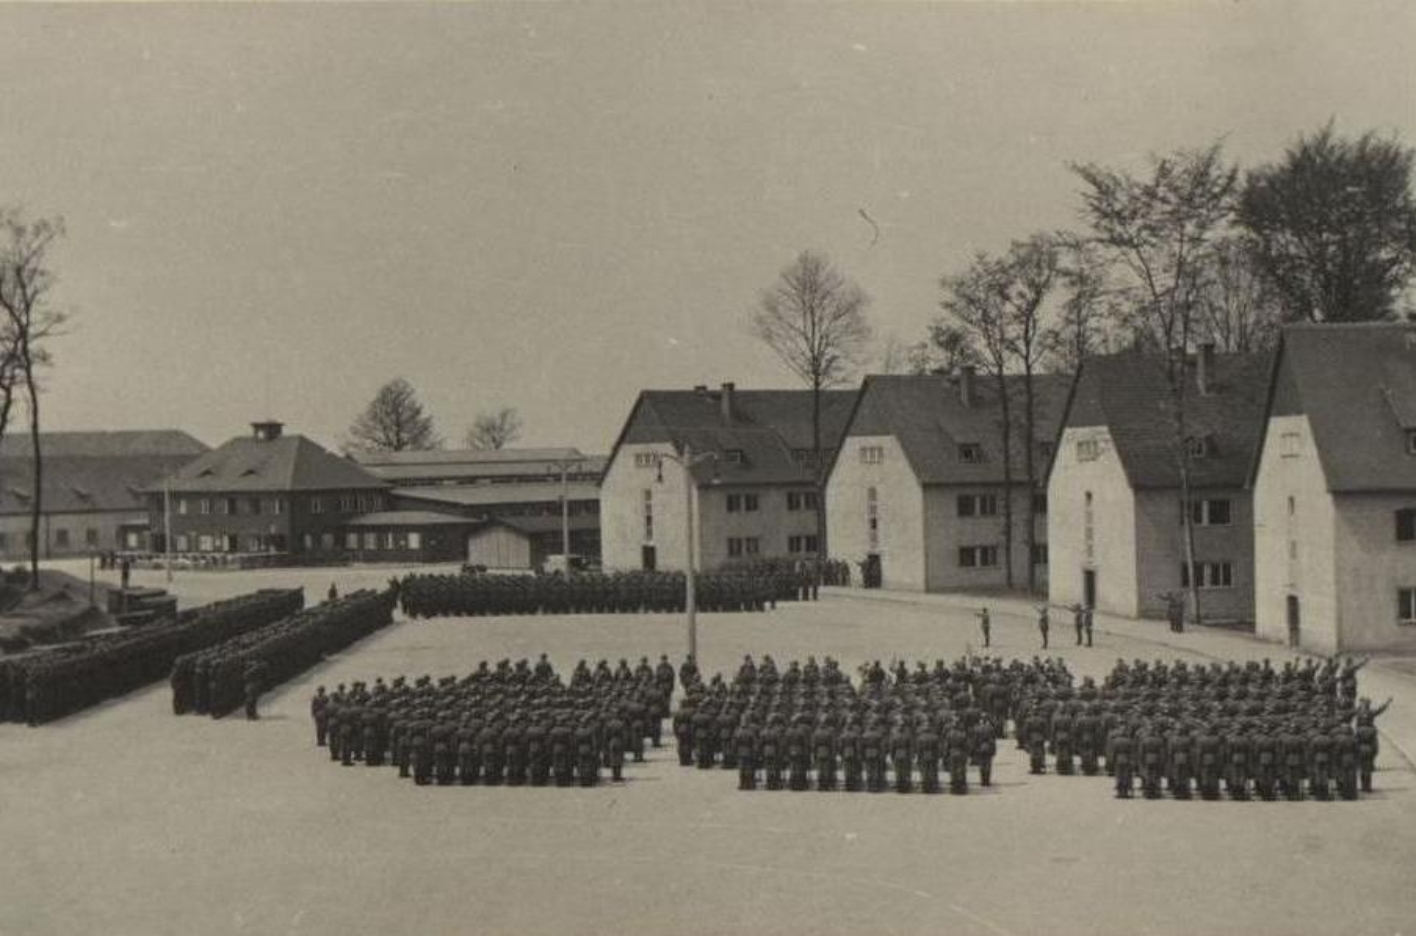 View of the SS Totenkopf Standarte 14 lined up on the parade ground in front of the Hundertschaftskasernen.